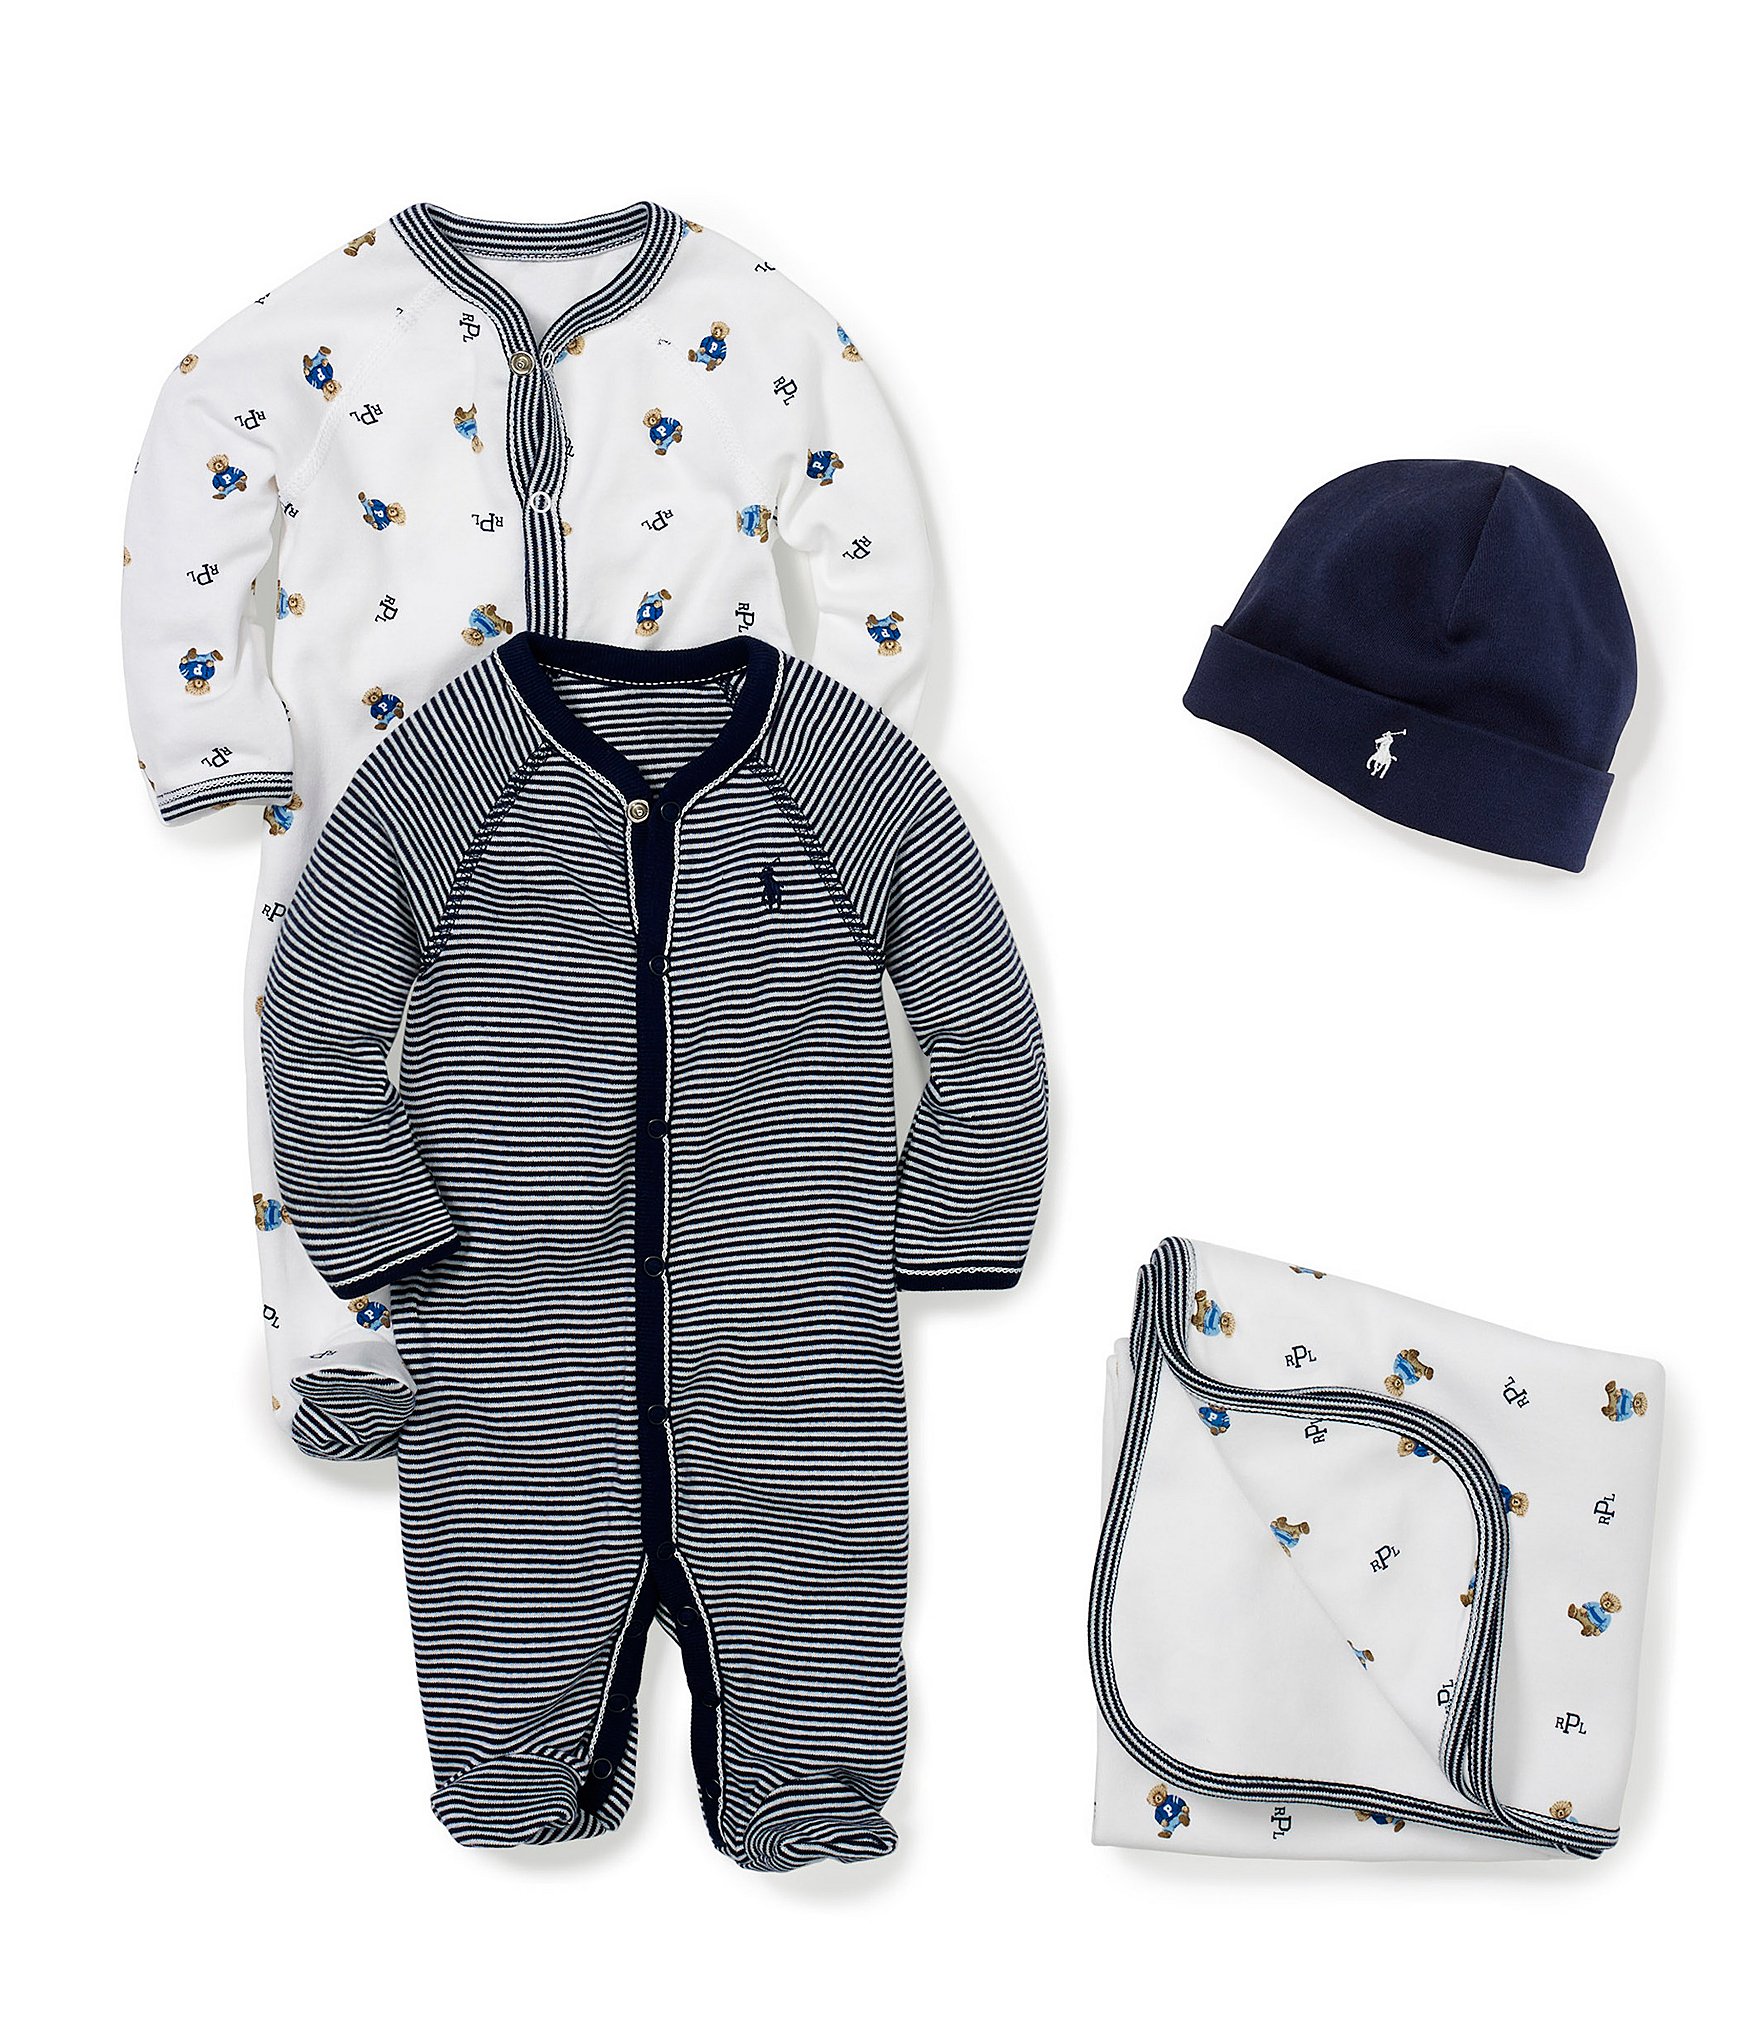 Awesome Dillards Baby Boy Clothes you should look